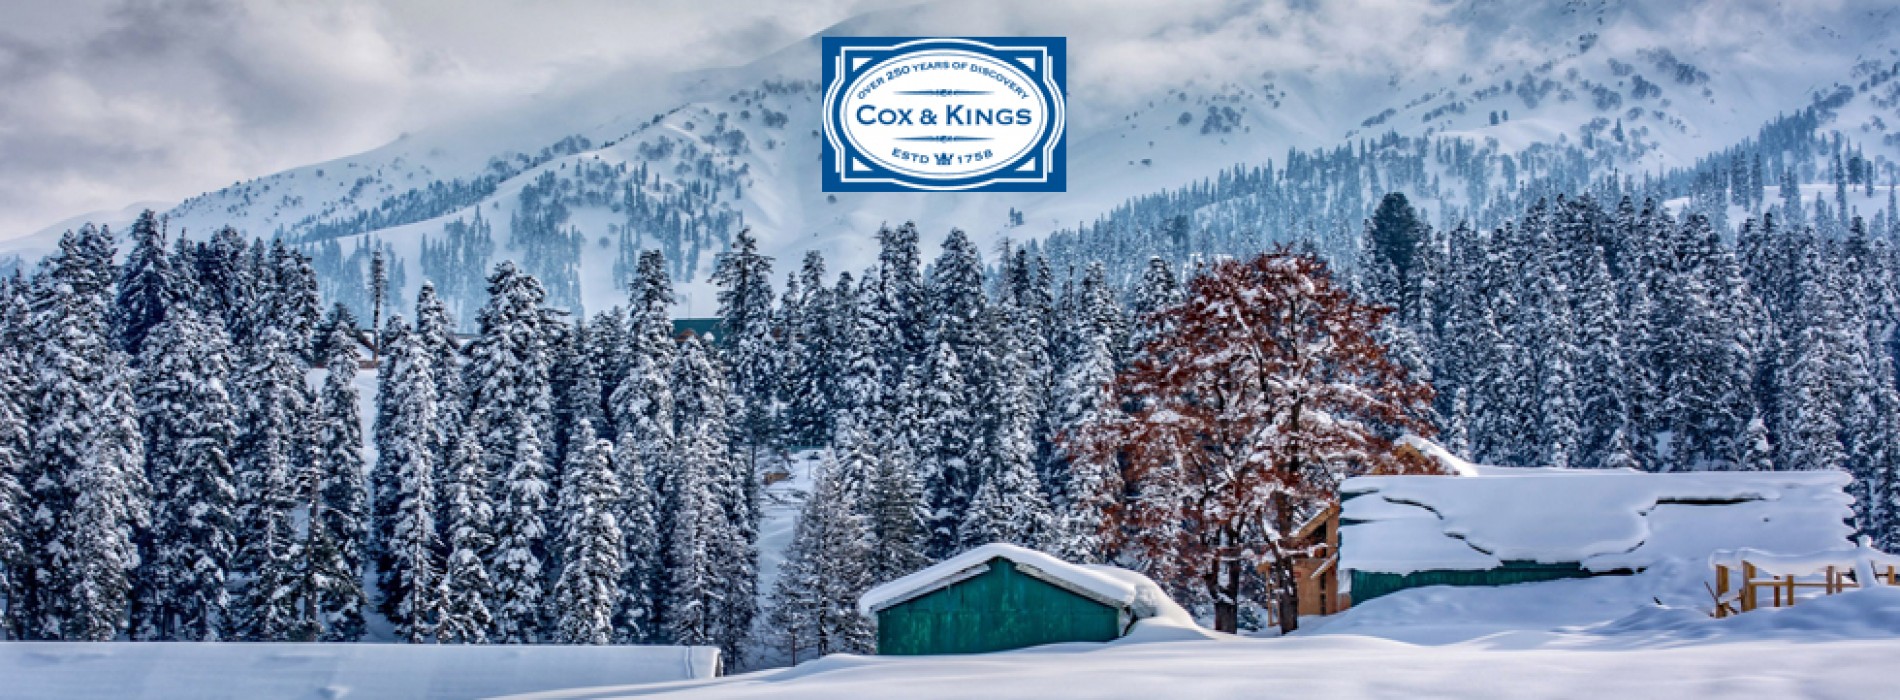 Director Tourism Kashmir launches Cox & Kings’ ‘Free Fly to Kashmir’ Holiday